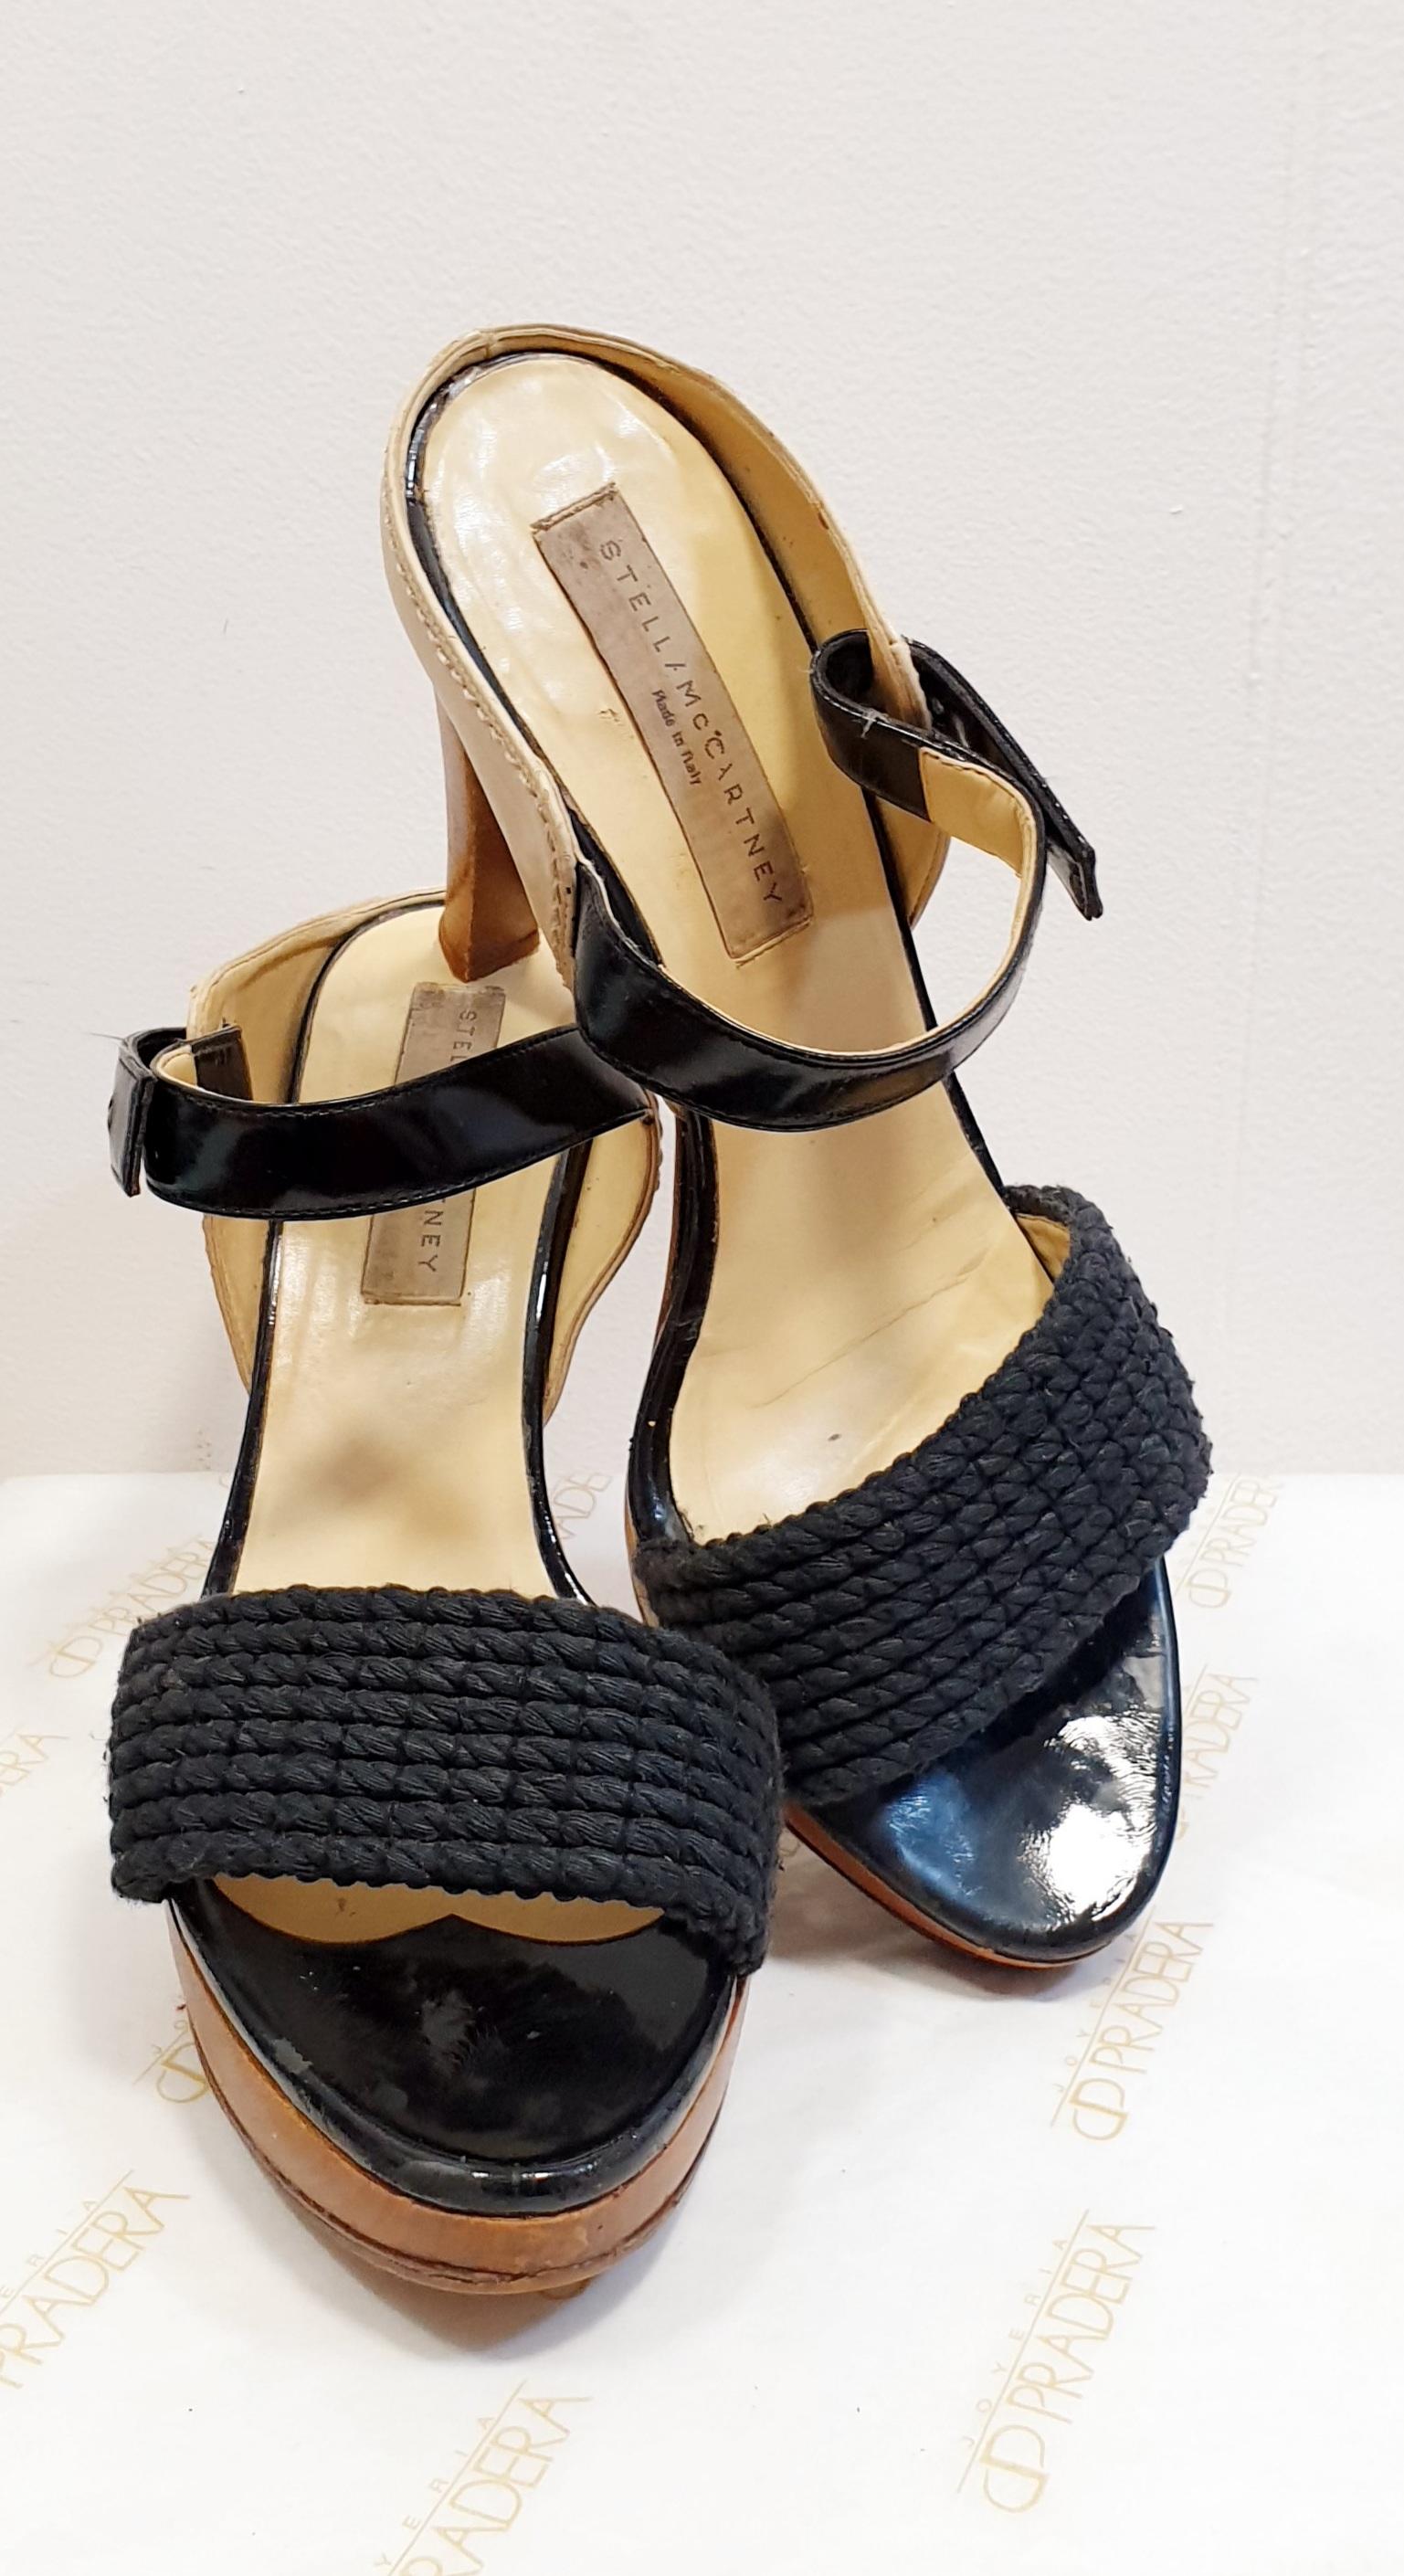 Platform Sandals  Stella McCartney Cotton and Patent Leather Sandals with Wooden Heel

Made In: Italy
Color: Black
Materials: Cotton and Patent Leather
Marked Size: 39,5 Europe
Heel Wedge : 11cm 4,33 inches 
Platform Height:  2,5cm 0,98